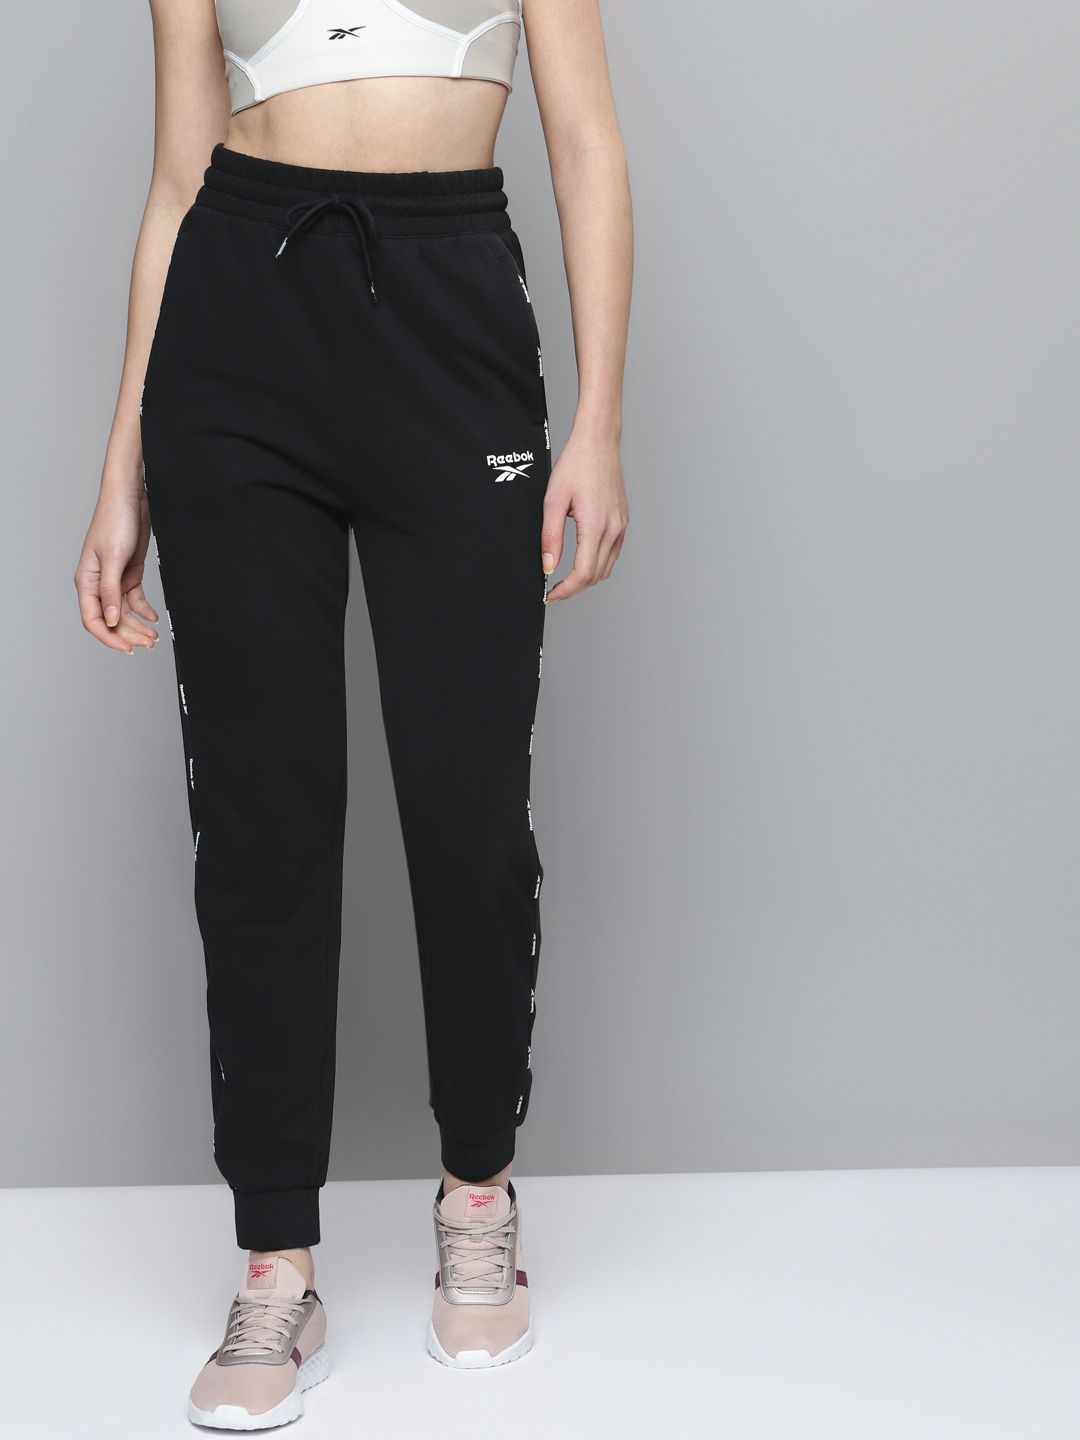 Reebok Women Black Piping Pack Solid Training Joggers Price in India